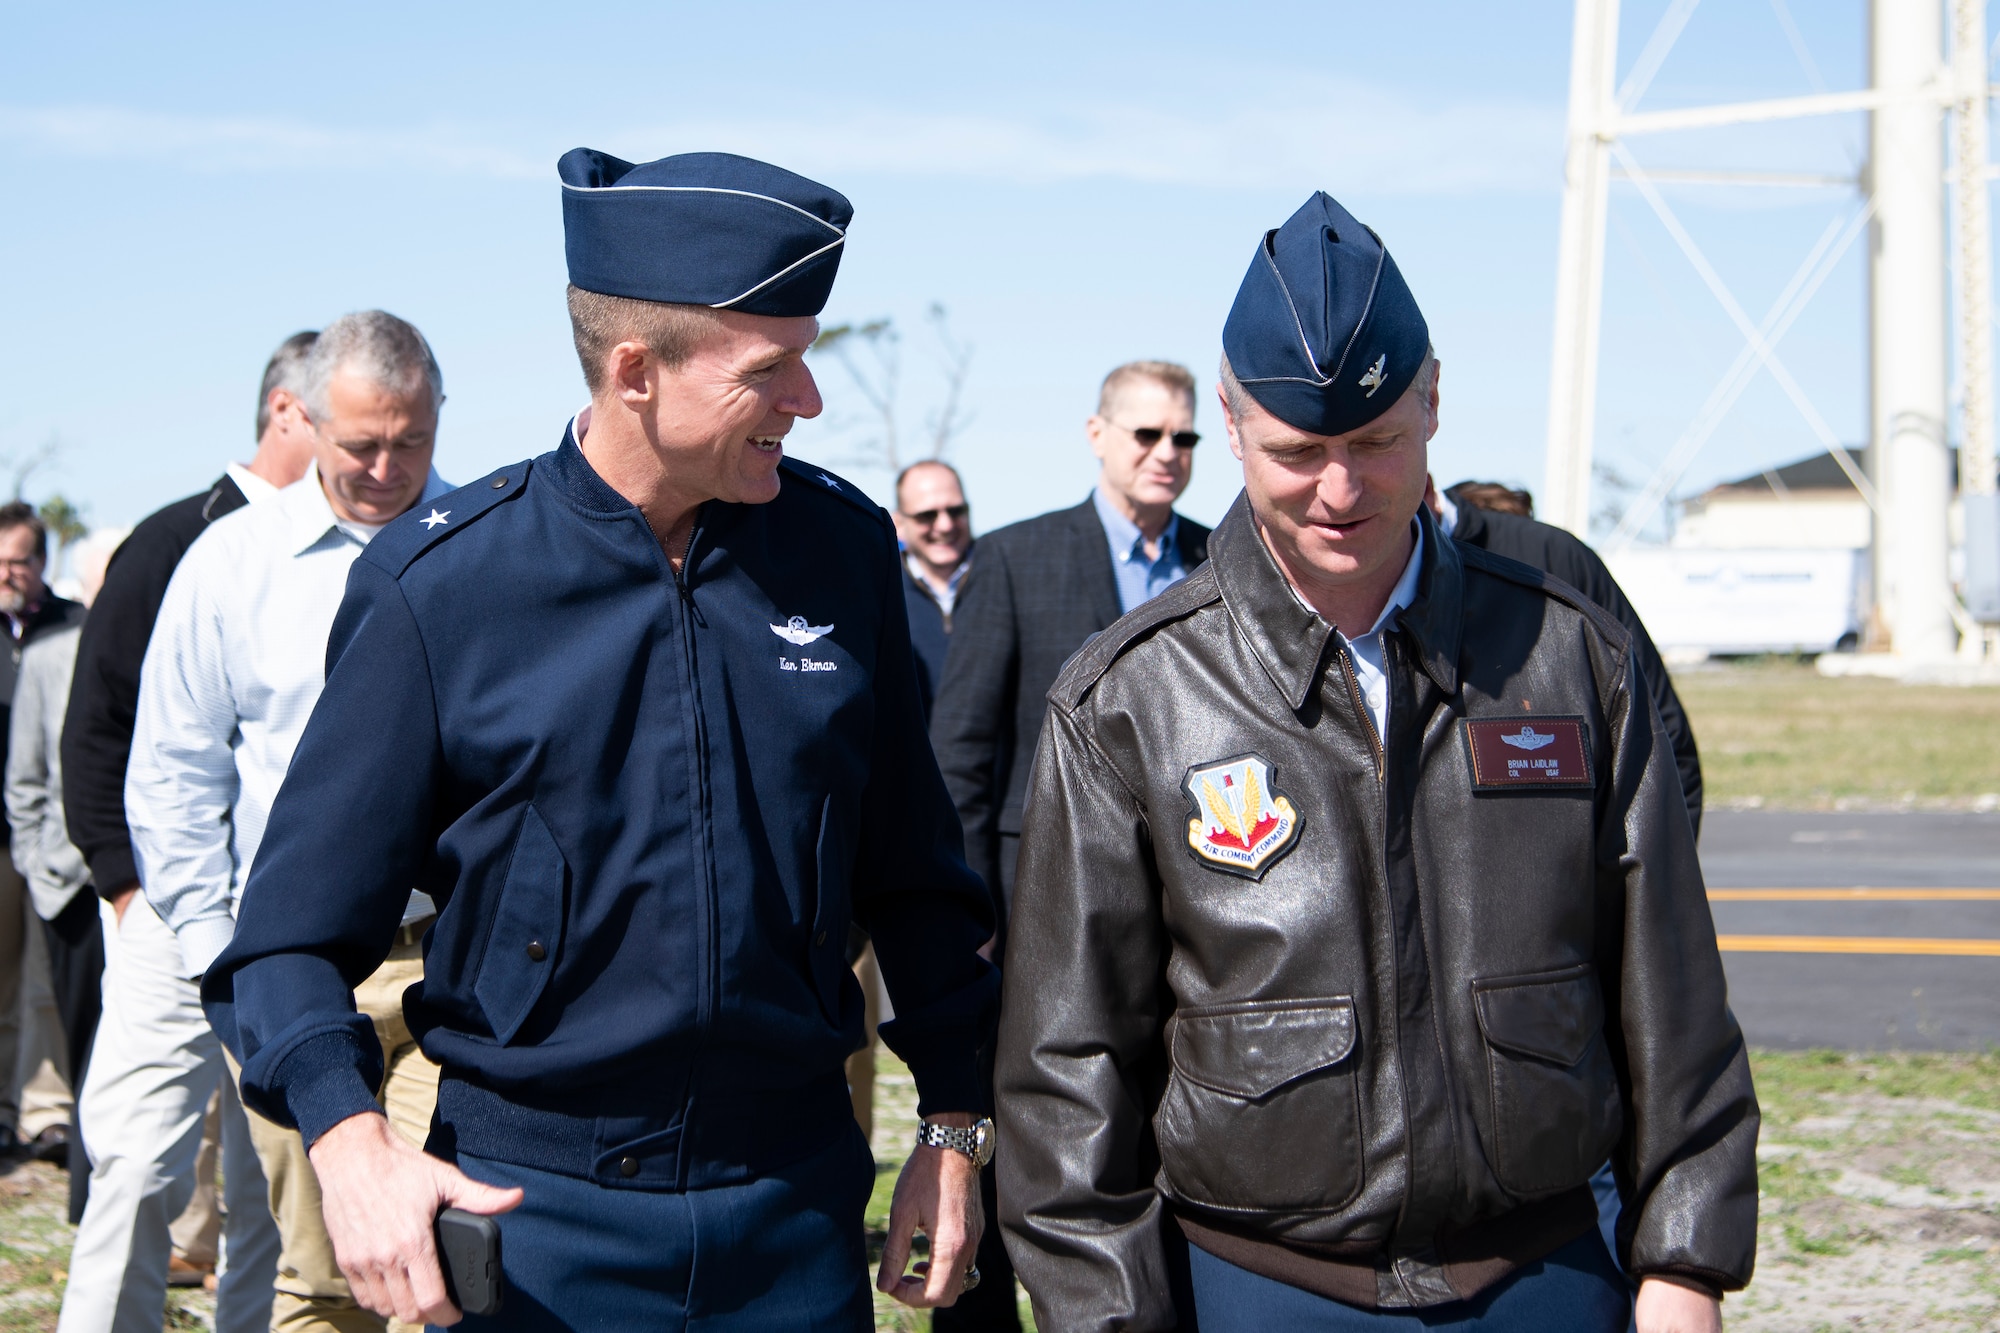 U.S. Air Force Brig. Gen. Ken Ekman, First Air Force and Air Forces Northern Command vice commander, talks with Col. Brian Laidlaw, 325th Fighter Wing commander, following the Great American Defense Communities celebration at Tyndall Air Force Base, Fla., Feb. 13, 2019. Bay County, is one of five communities across the country to be named a Great American Defense Community in 2019. The GADC program leaders work to recognize military communities and regions that help improve the quality of life for veterans, service members and their families. (U.S. Air Force photo by Senior Airman Javier Alvarez)